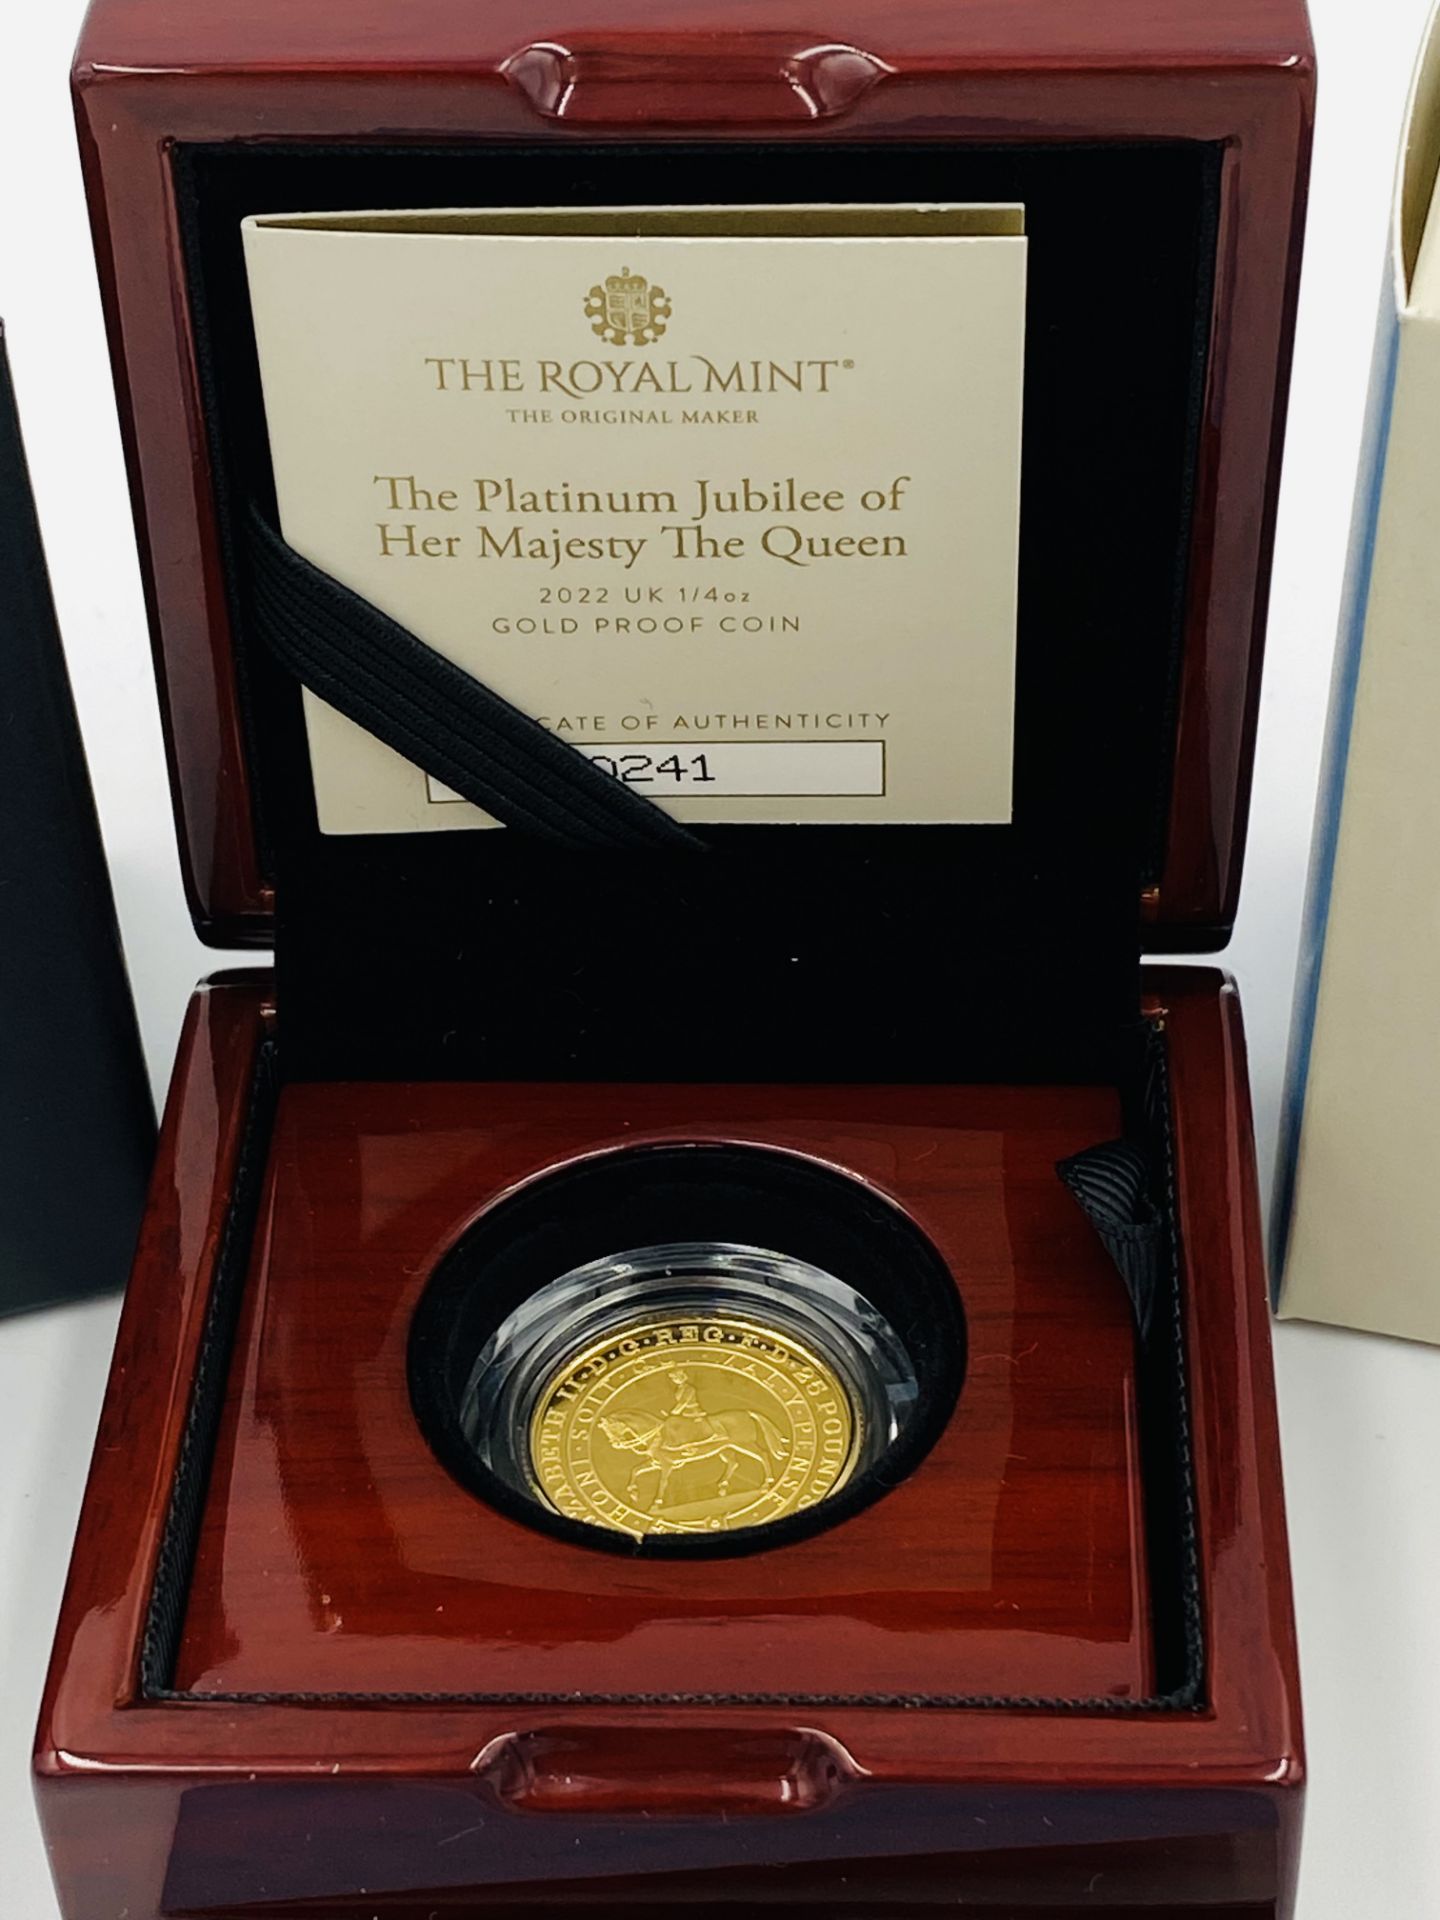 Royal Mint Platinum Jubilee of Her Majesty the Queen, 2022 limited edition gold proof coin - Image 2 of 4